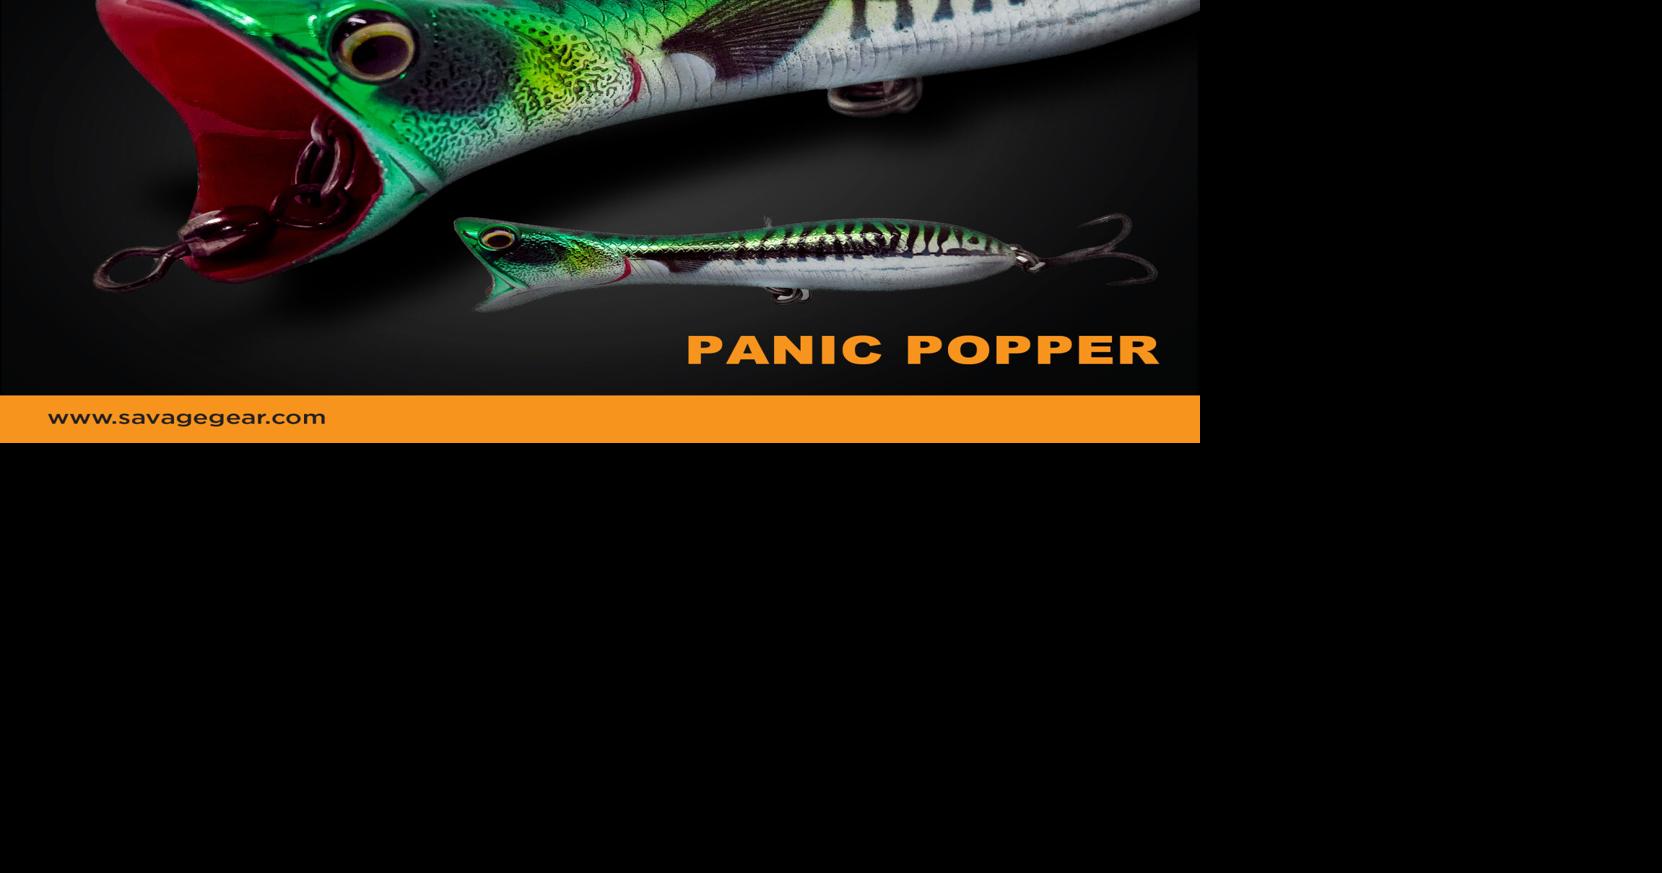 Savage Gear Introduces the High-Action Panic Popper